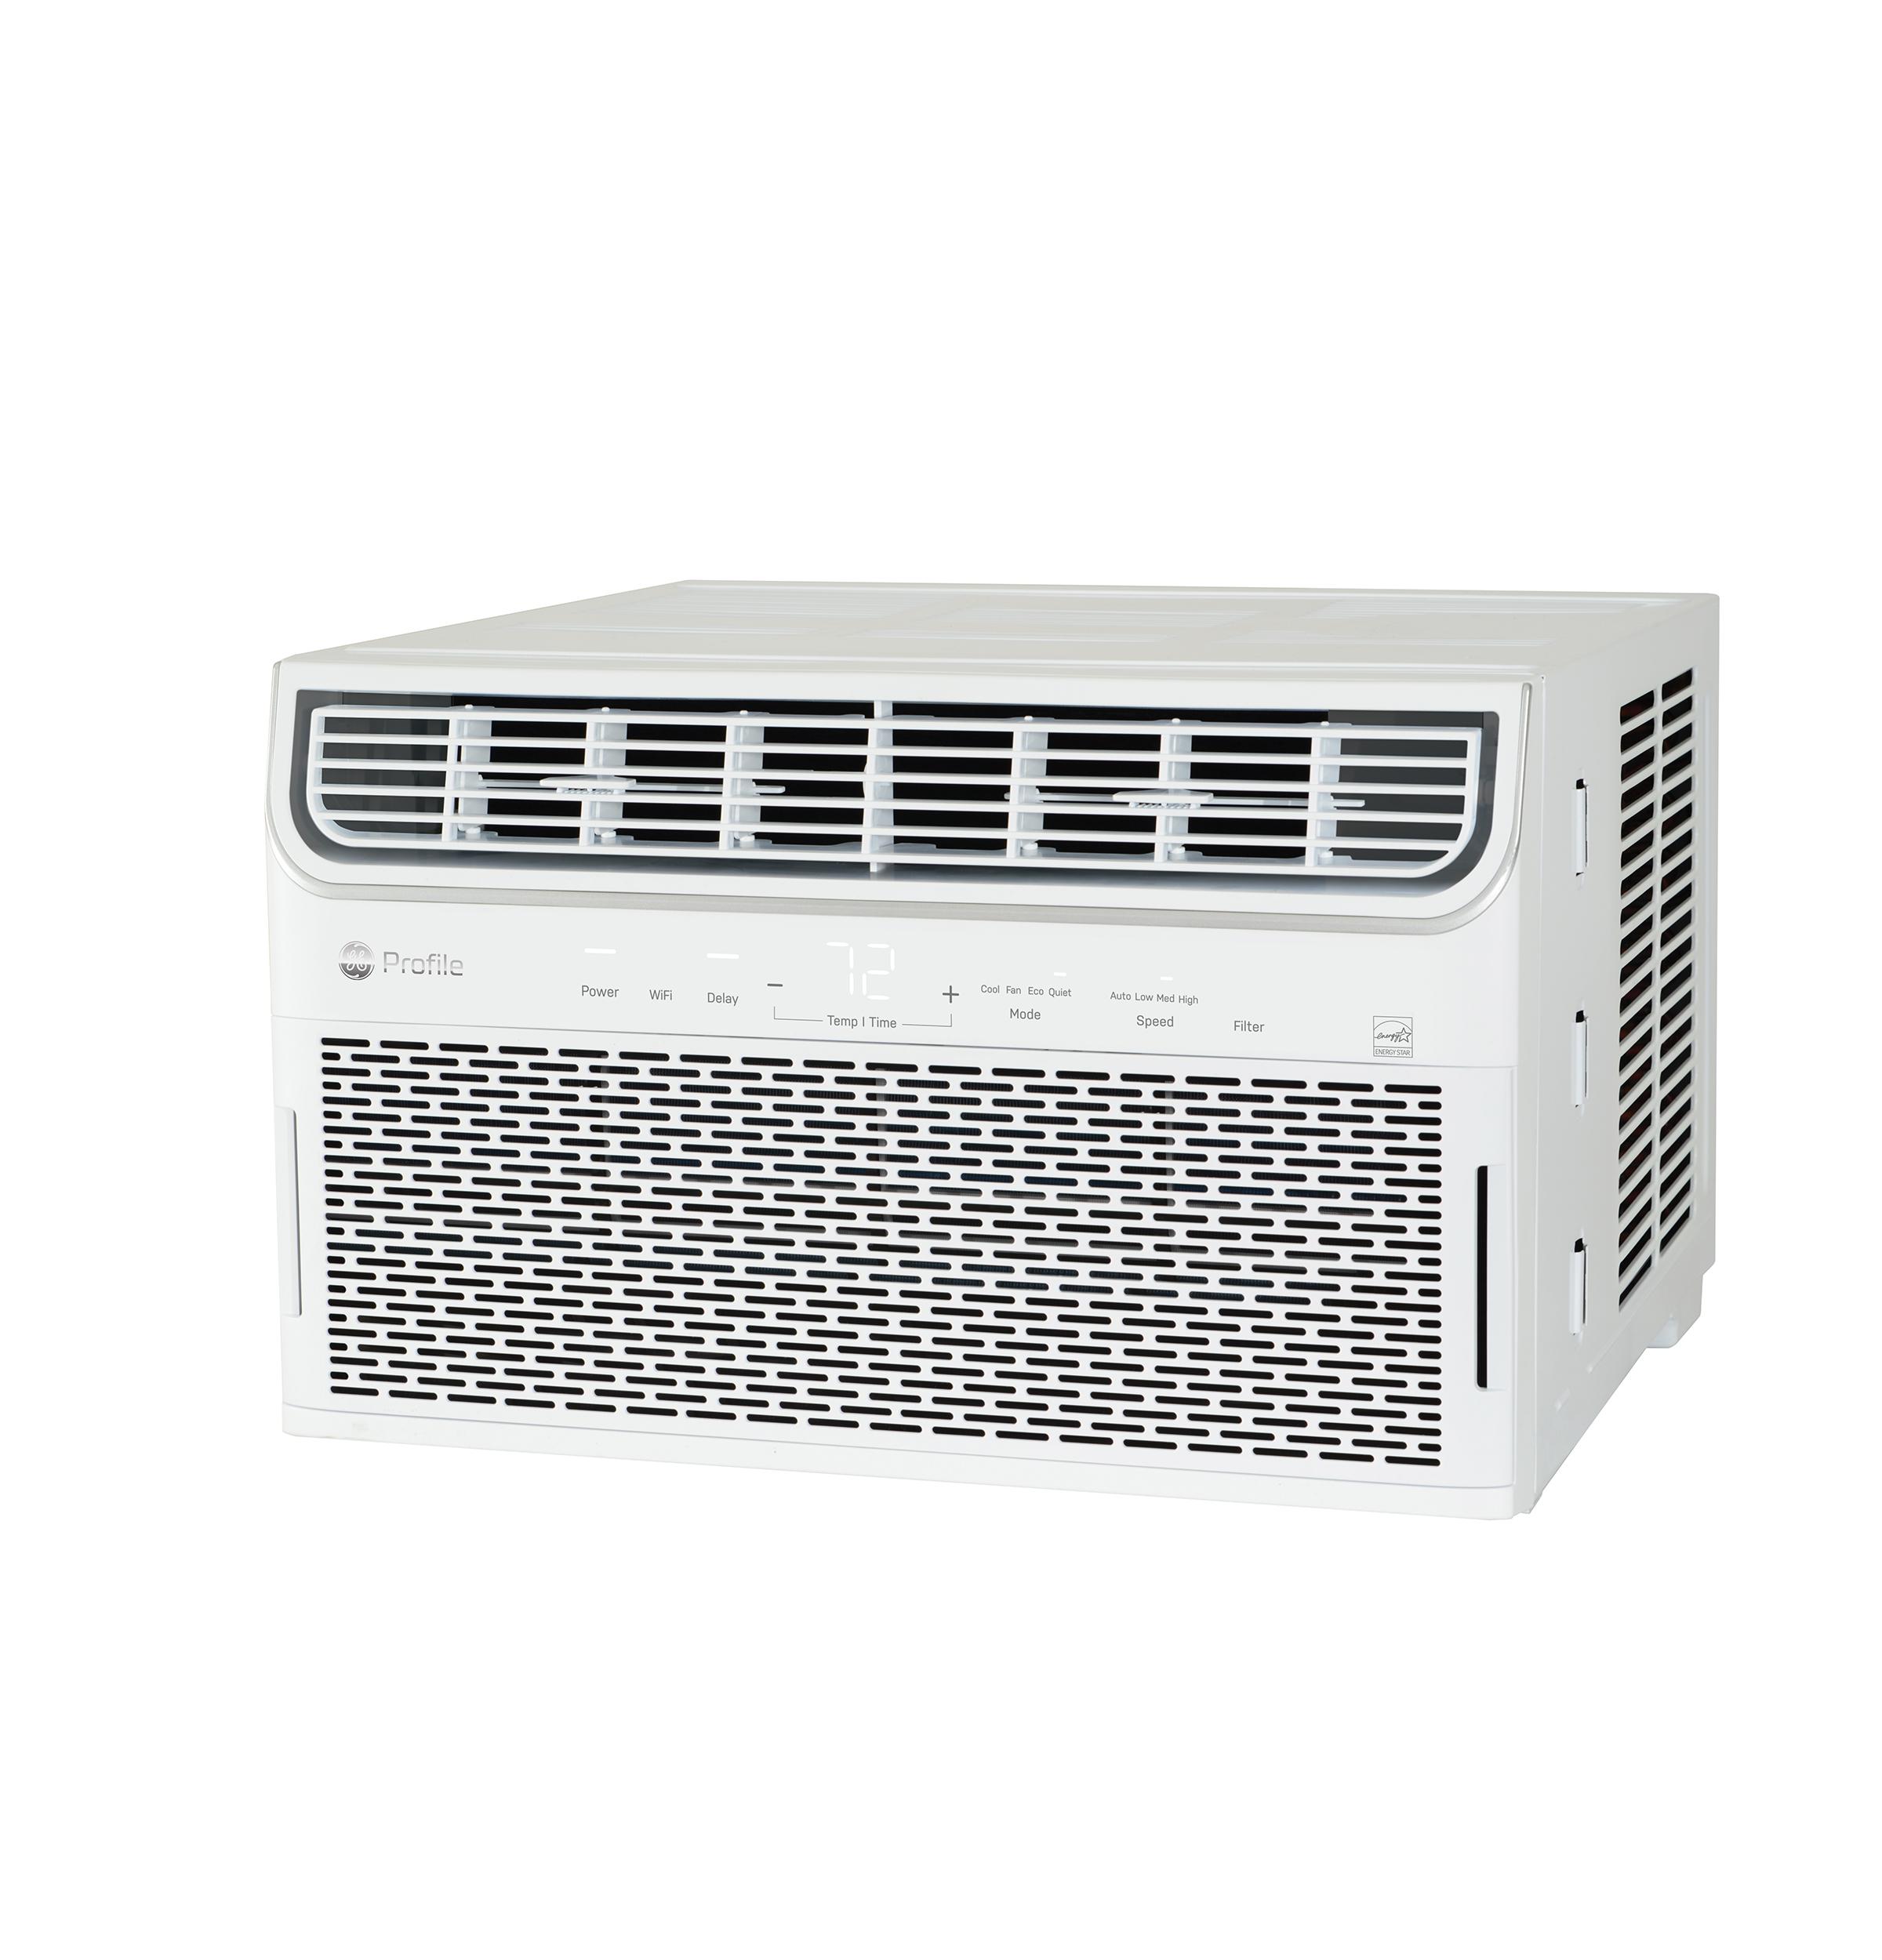 GE Profile™ ENERGY STAR® 13,500 BTU Inverter Smart Ultra Quiet Window Air Conditioner for Large Rooms up to 700 sq. ft.